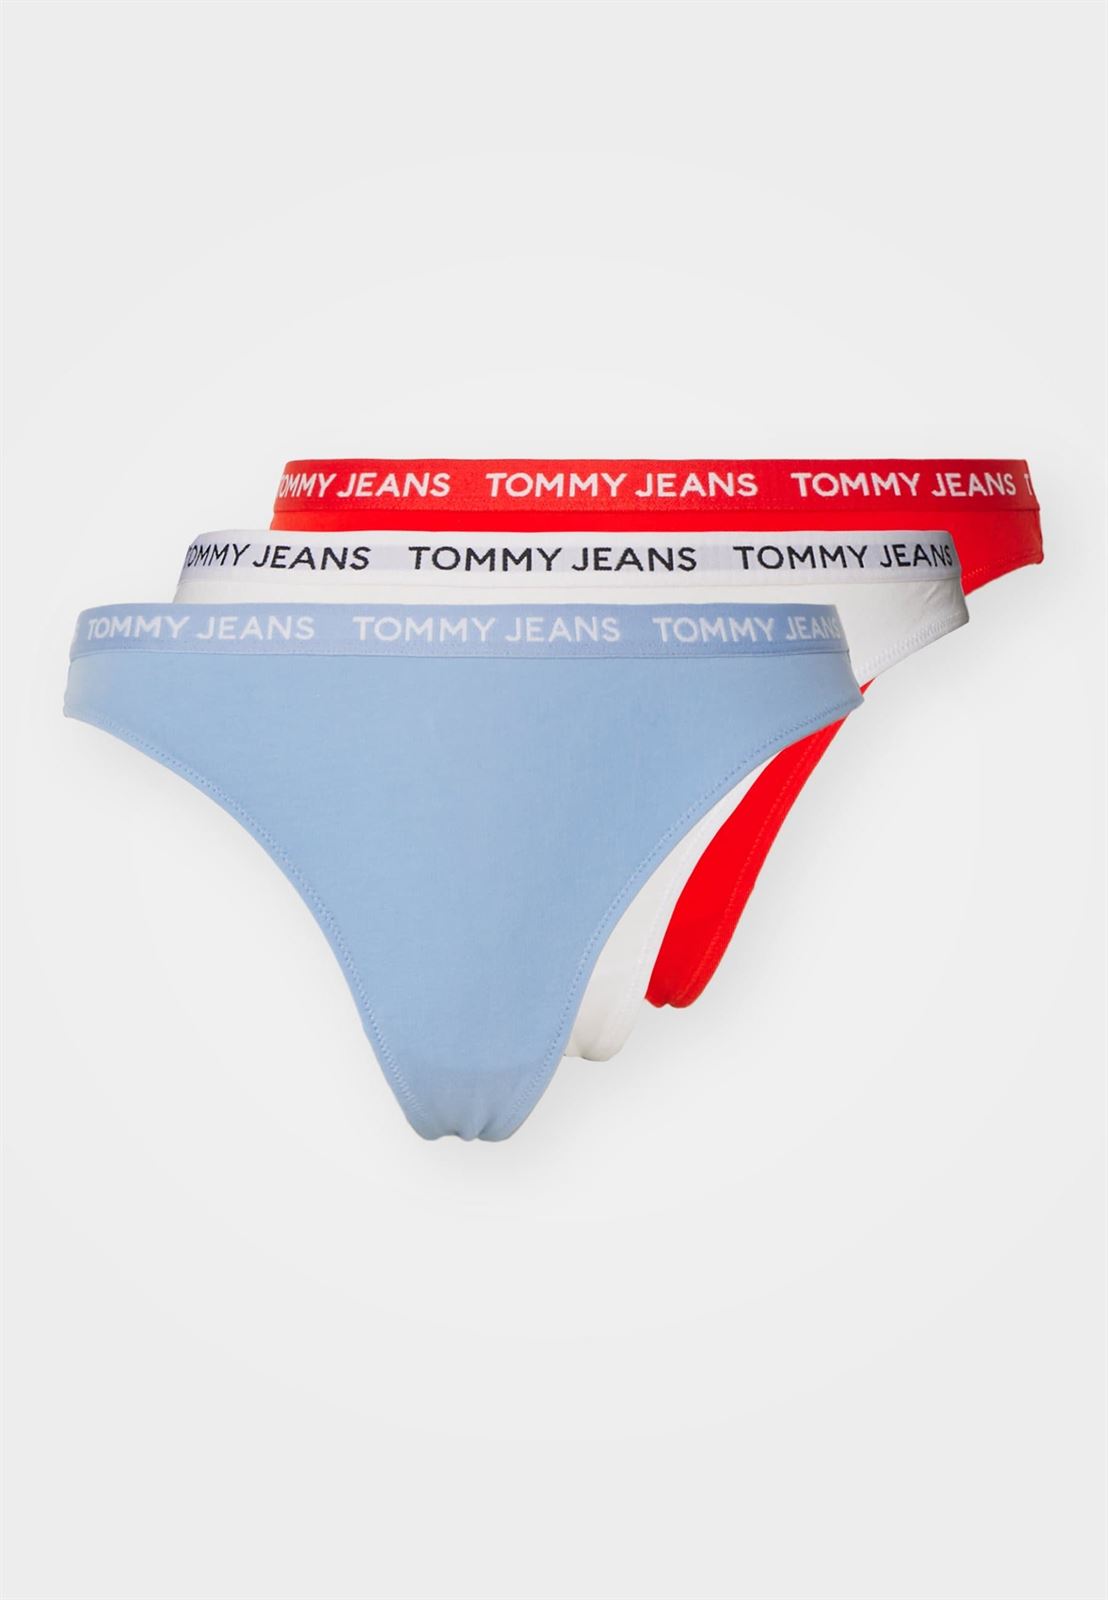 Pack 3 tangas Tommy Jeans UWOUW05008 0V2 hot heat/white/Mod Blue - Imagen 1